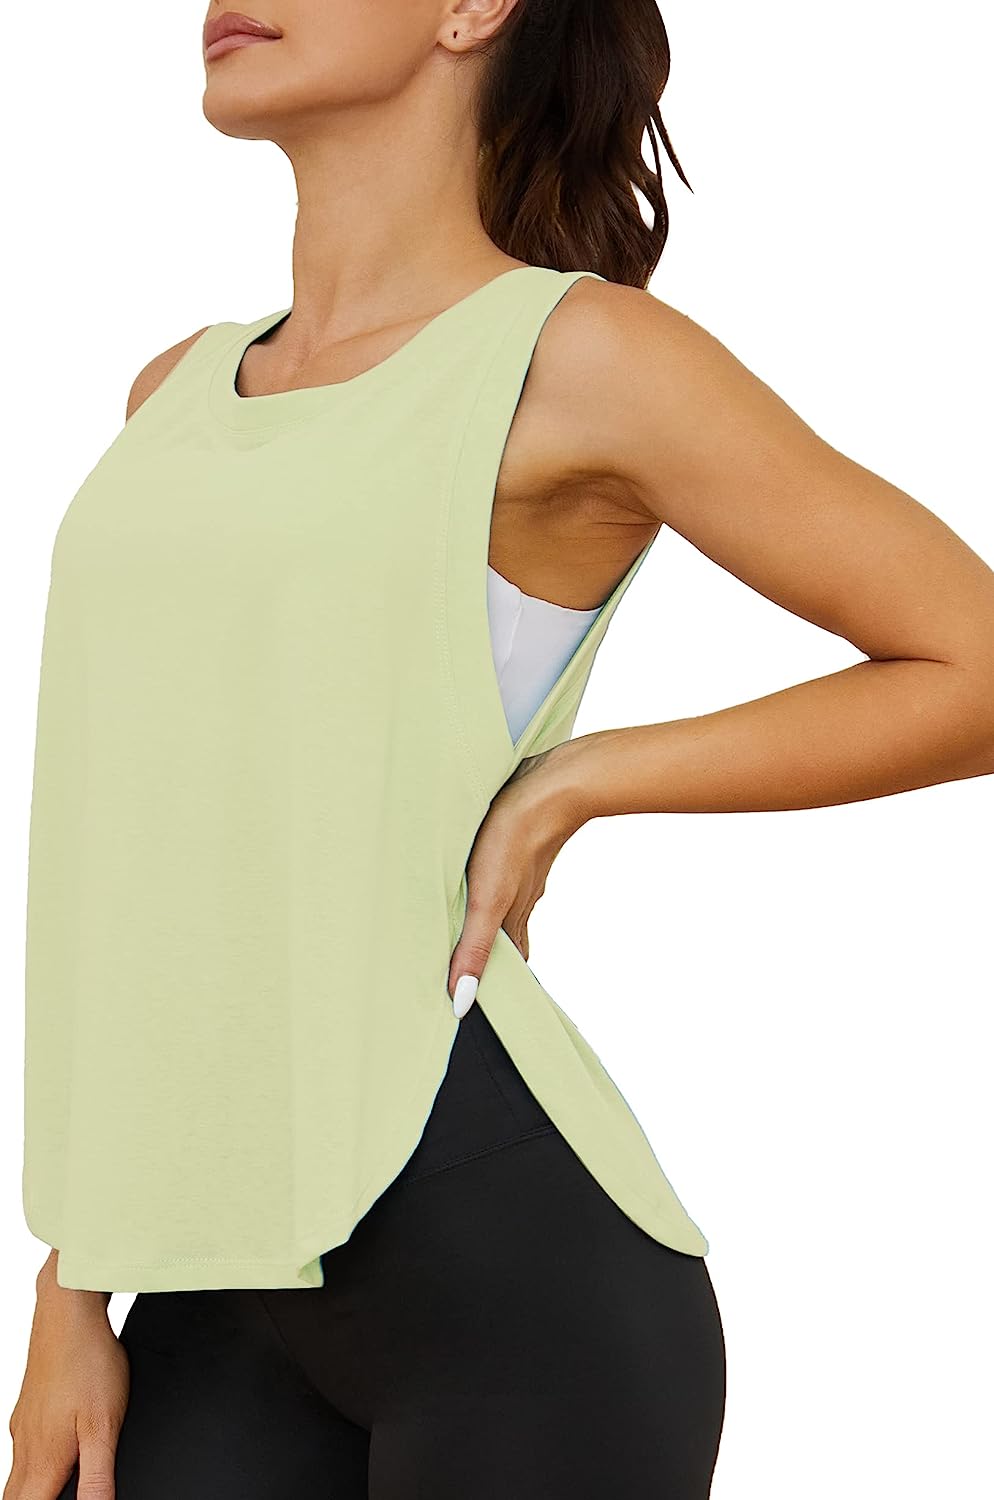 Cotton Athletic Workout Tank Tops for Women - Sleeveless Loose